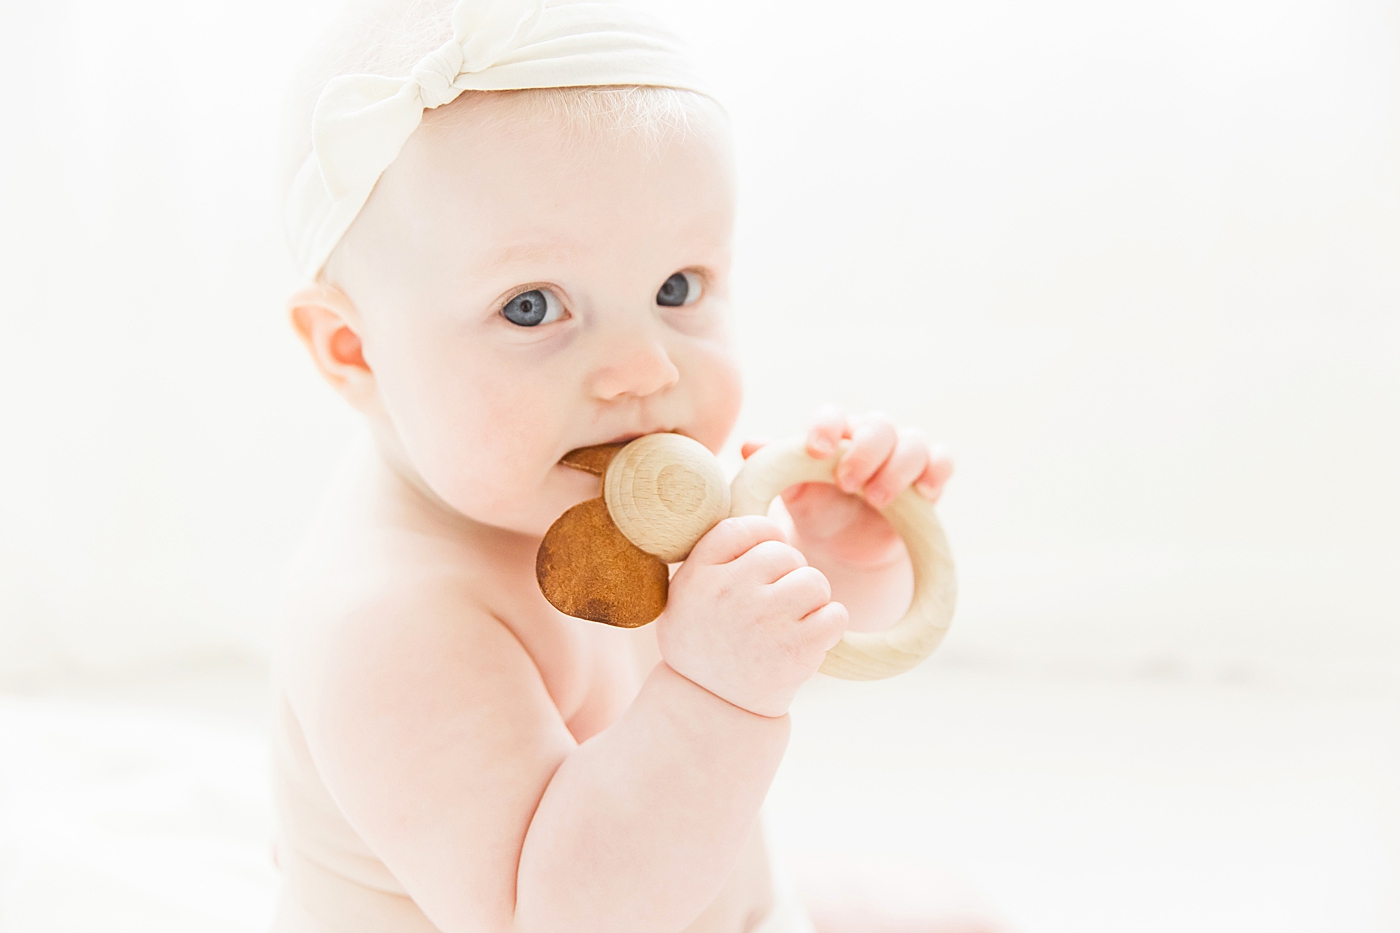 Six month old chewing on wood toy. Photos by Fresh Light Photography.